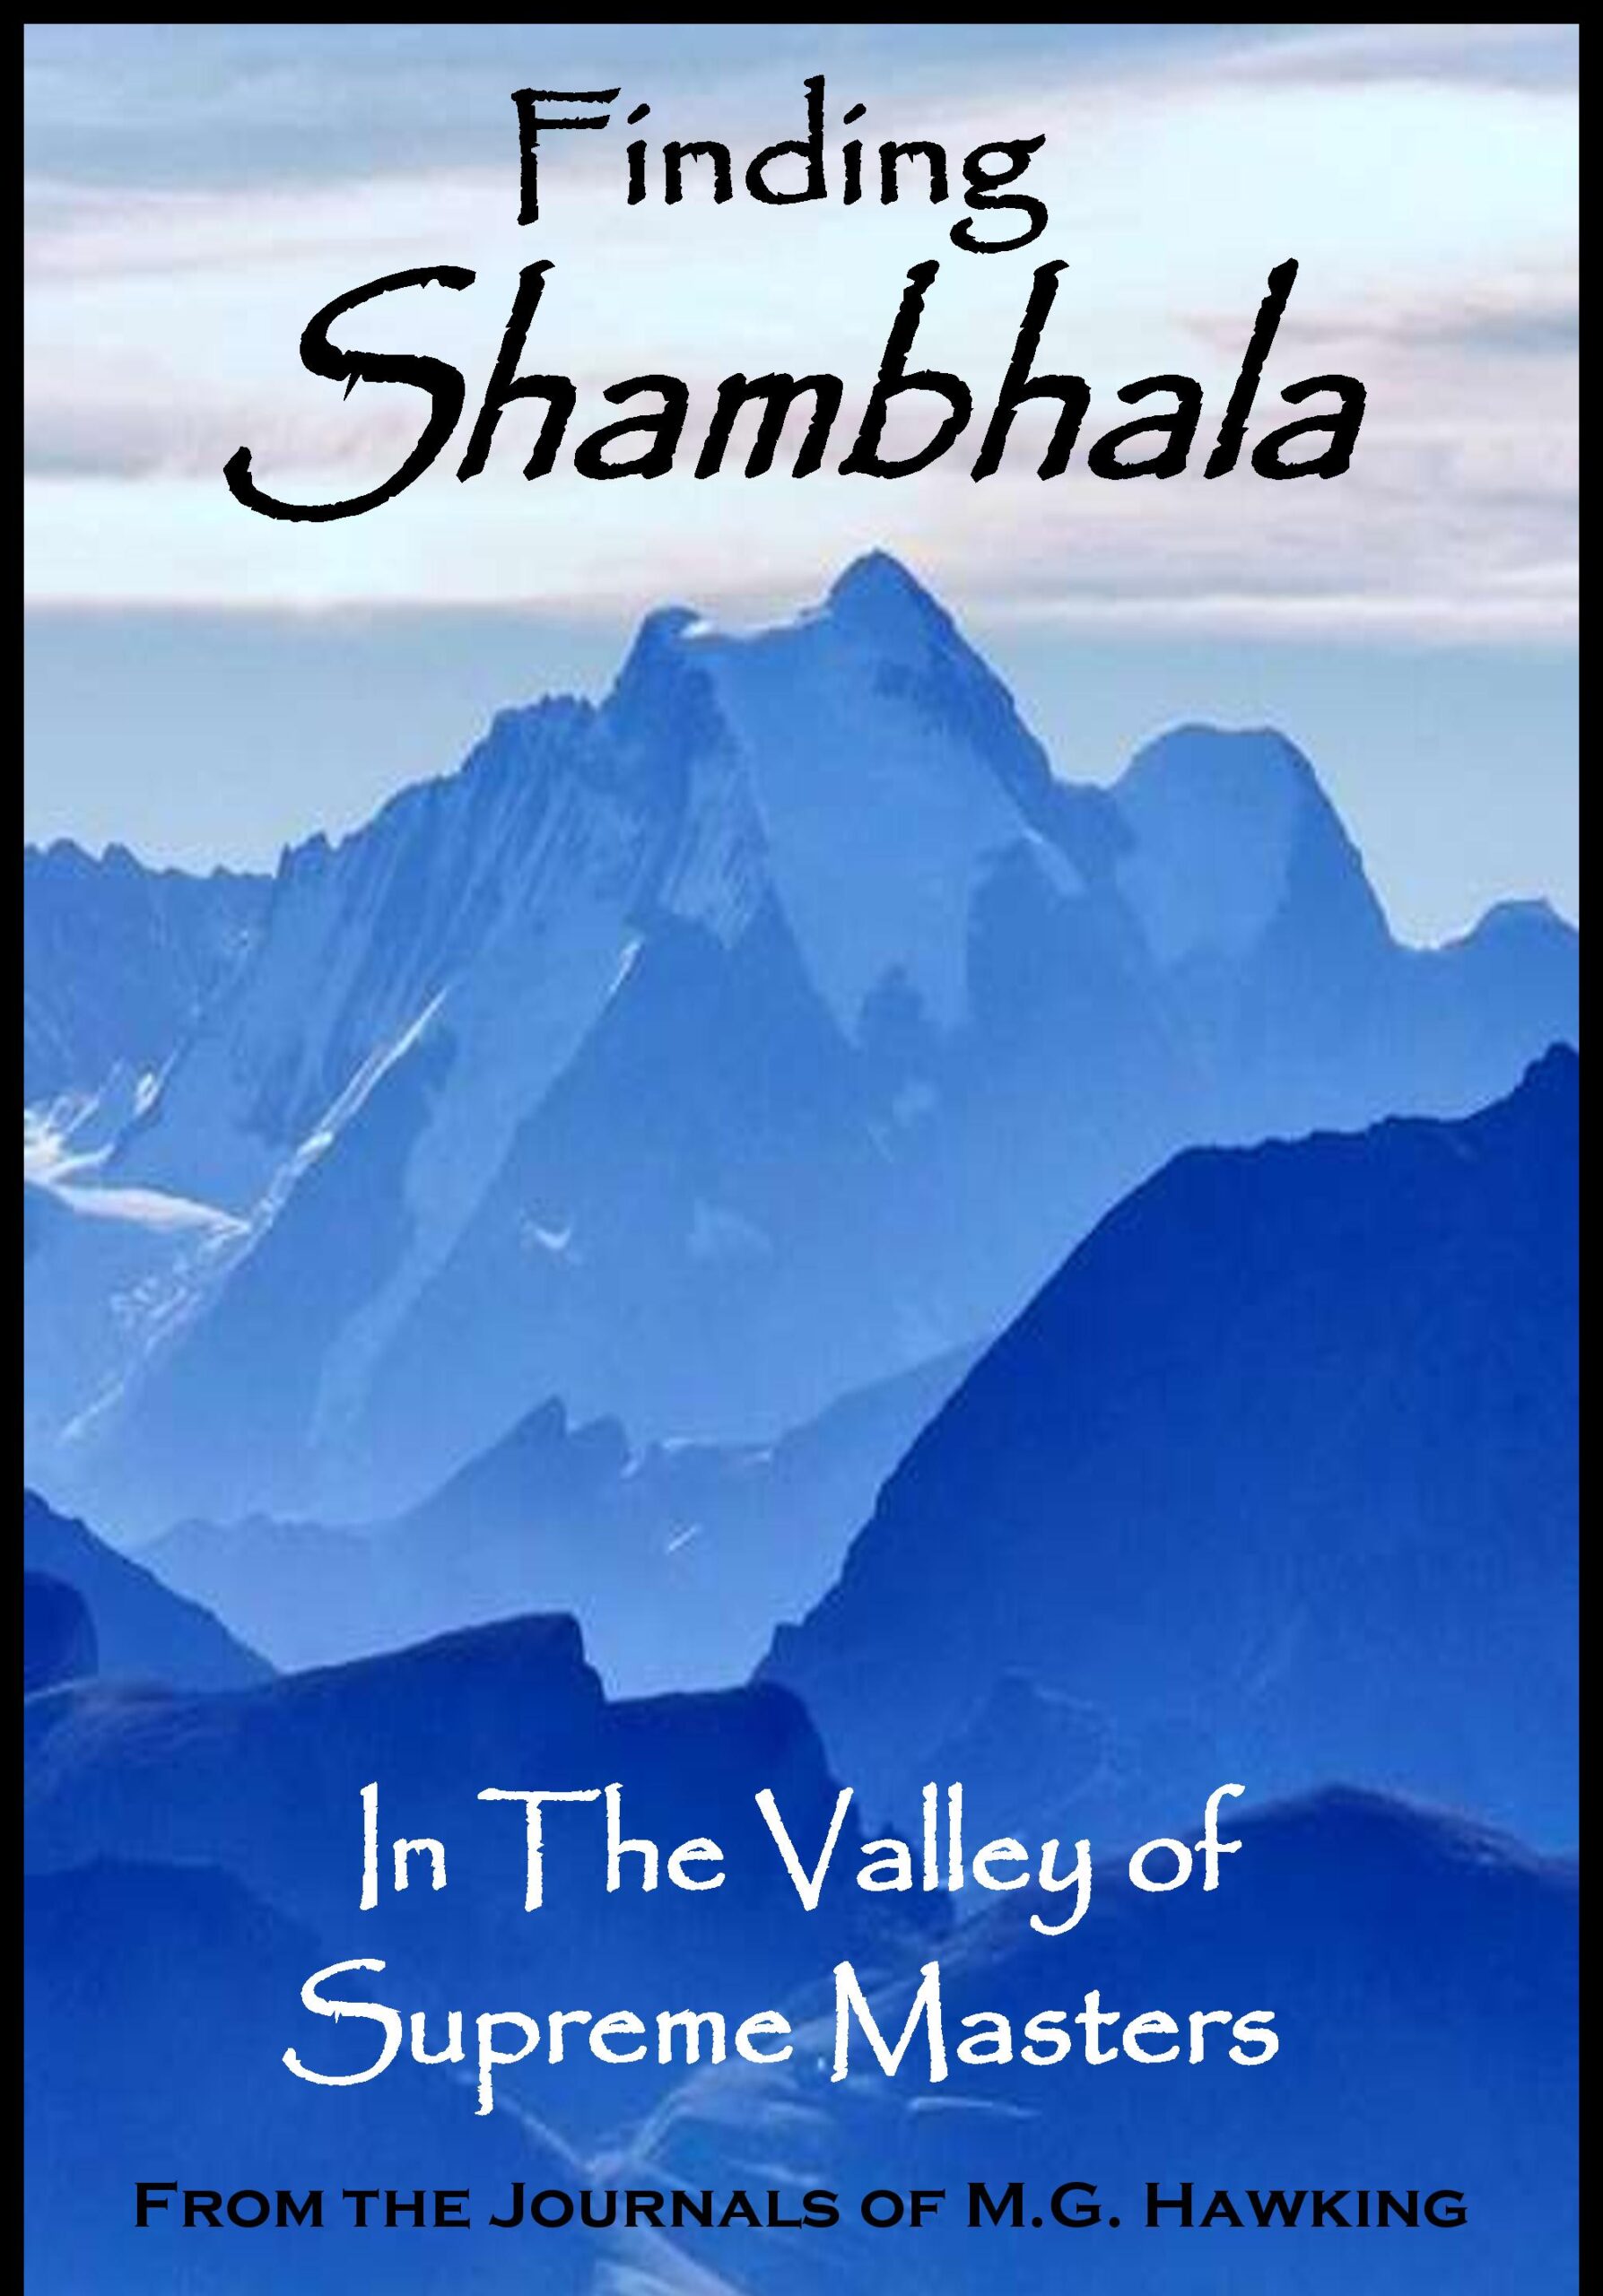 FREE: Finding Shambhala: In The Valley of Supreme Masters by Michael Hawking